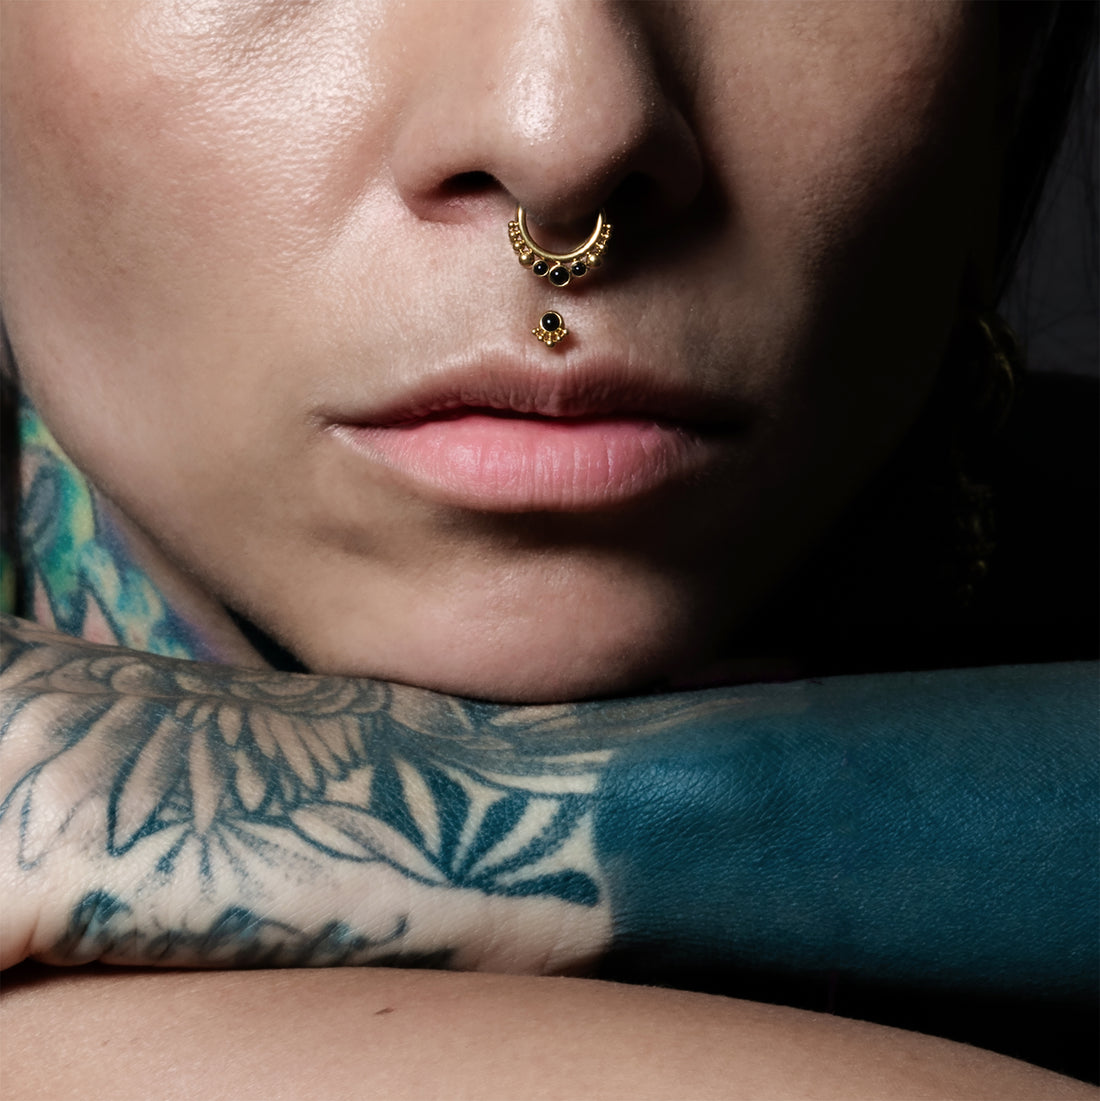 model wearing Golden Siti Clicker Ring with Black Onyx and Layla medusa labret